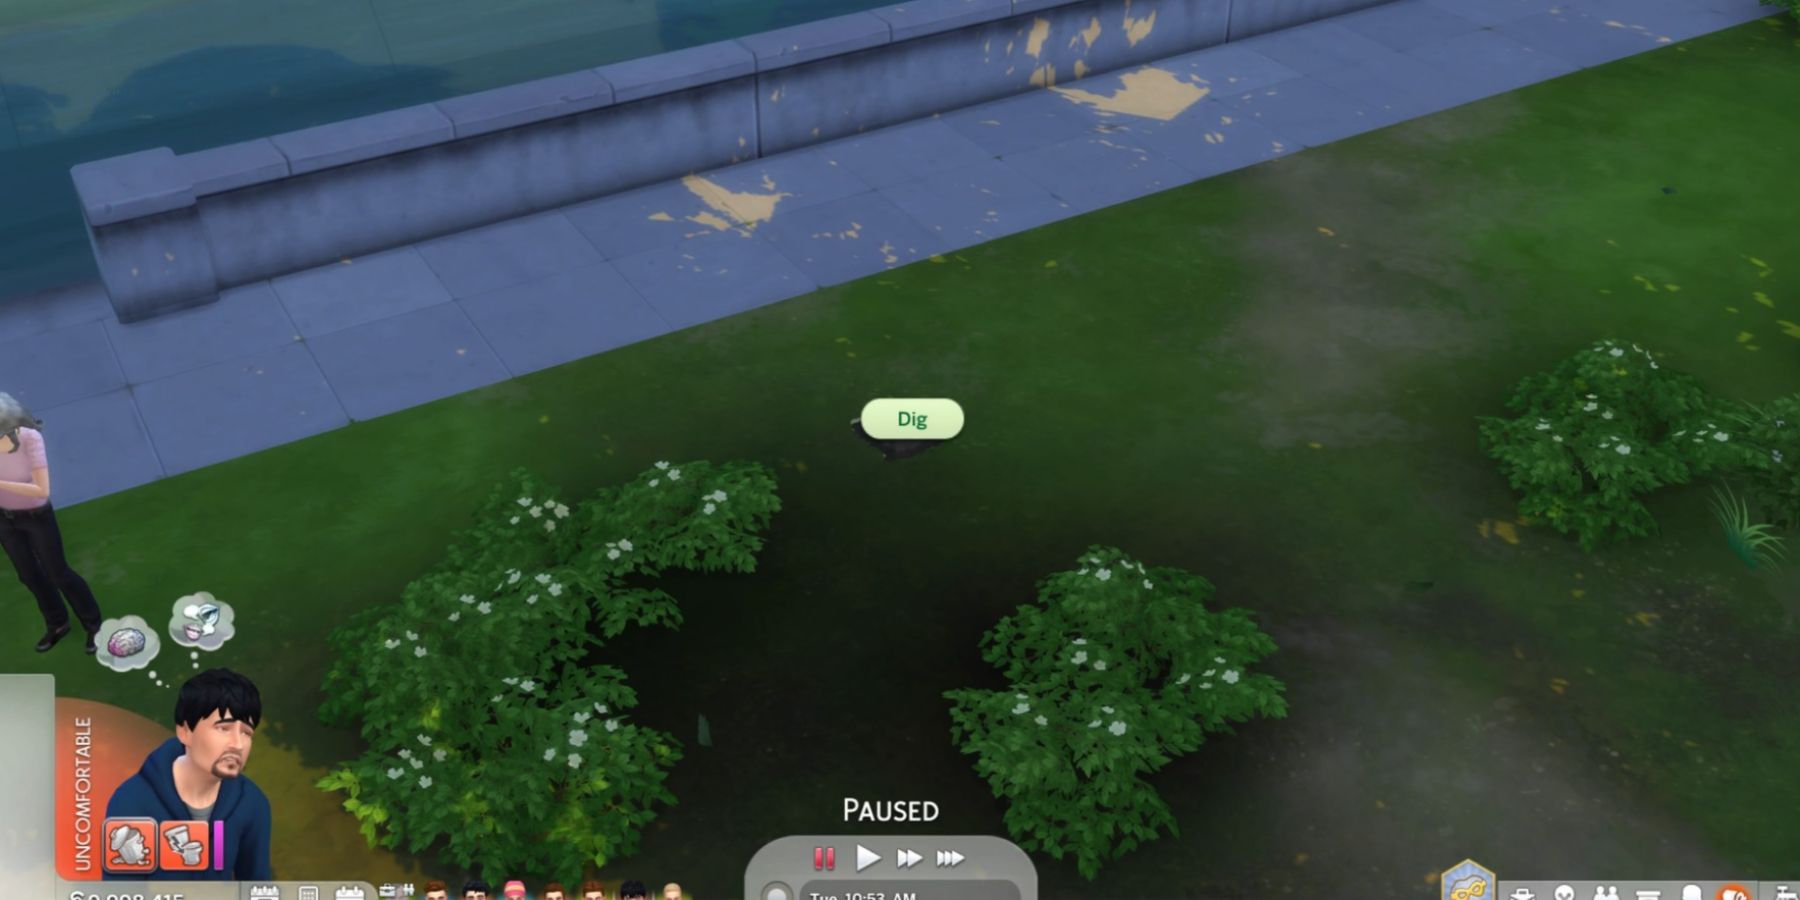 Digging for treasure in The Sims 4